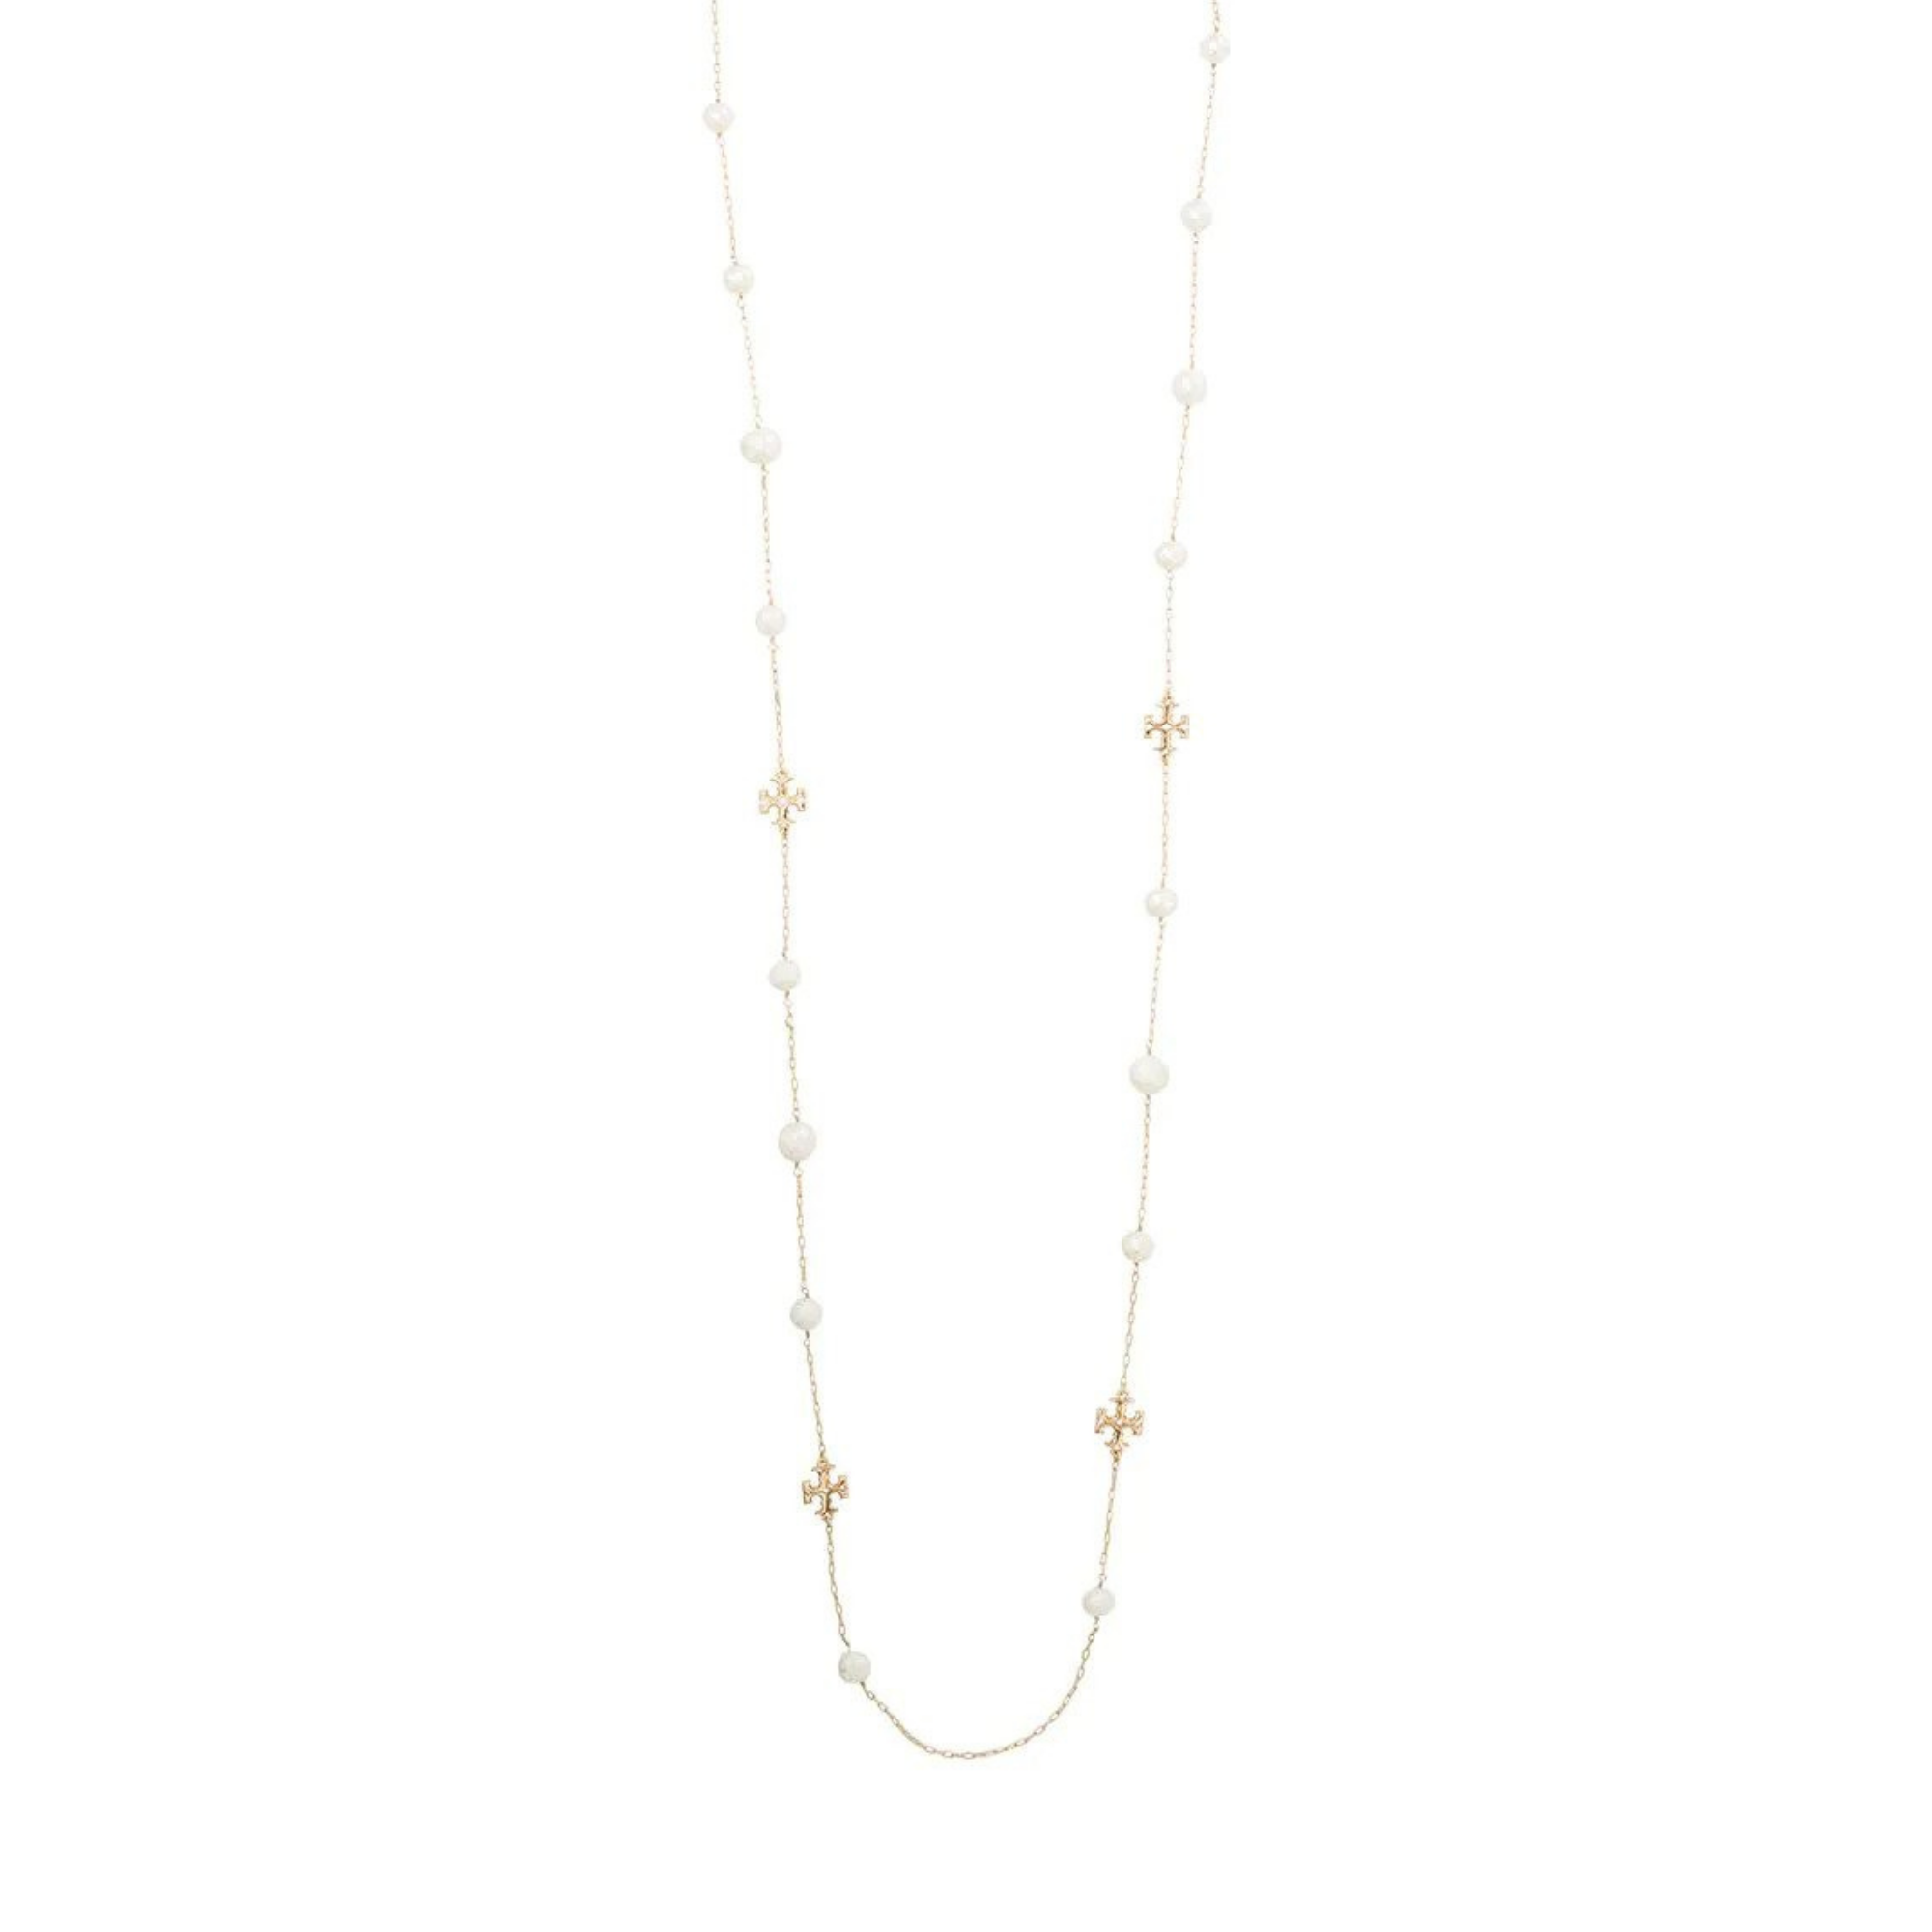 Tory Burch Kira Pearl-Chain Necklace, $200